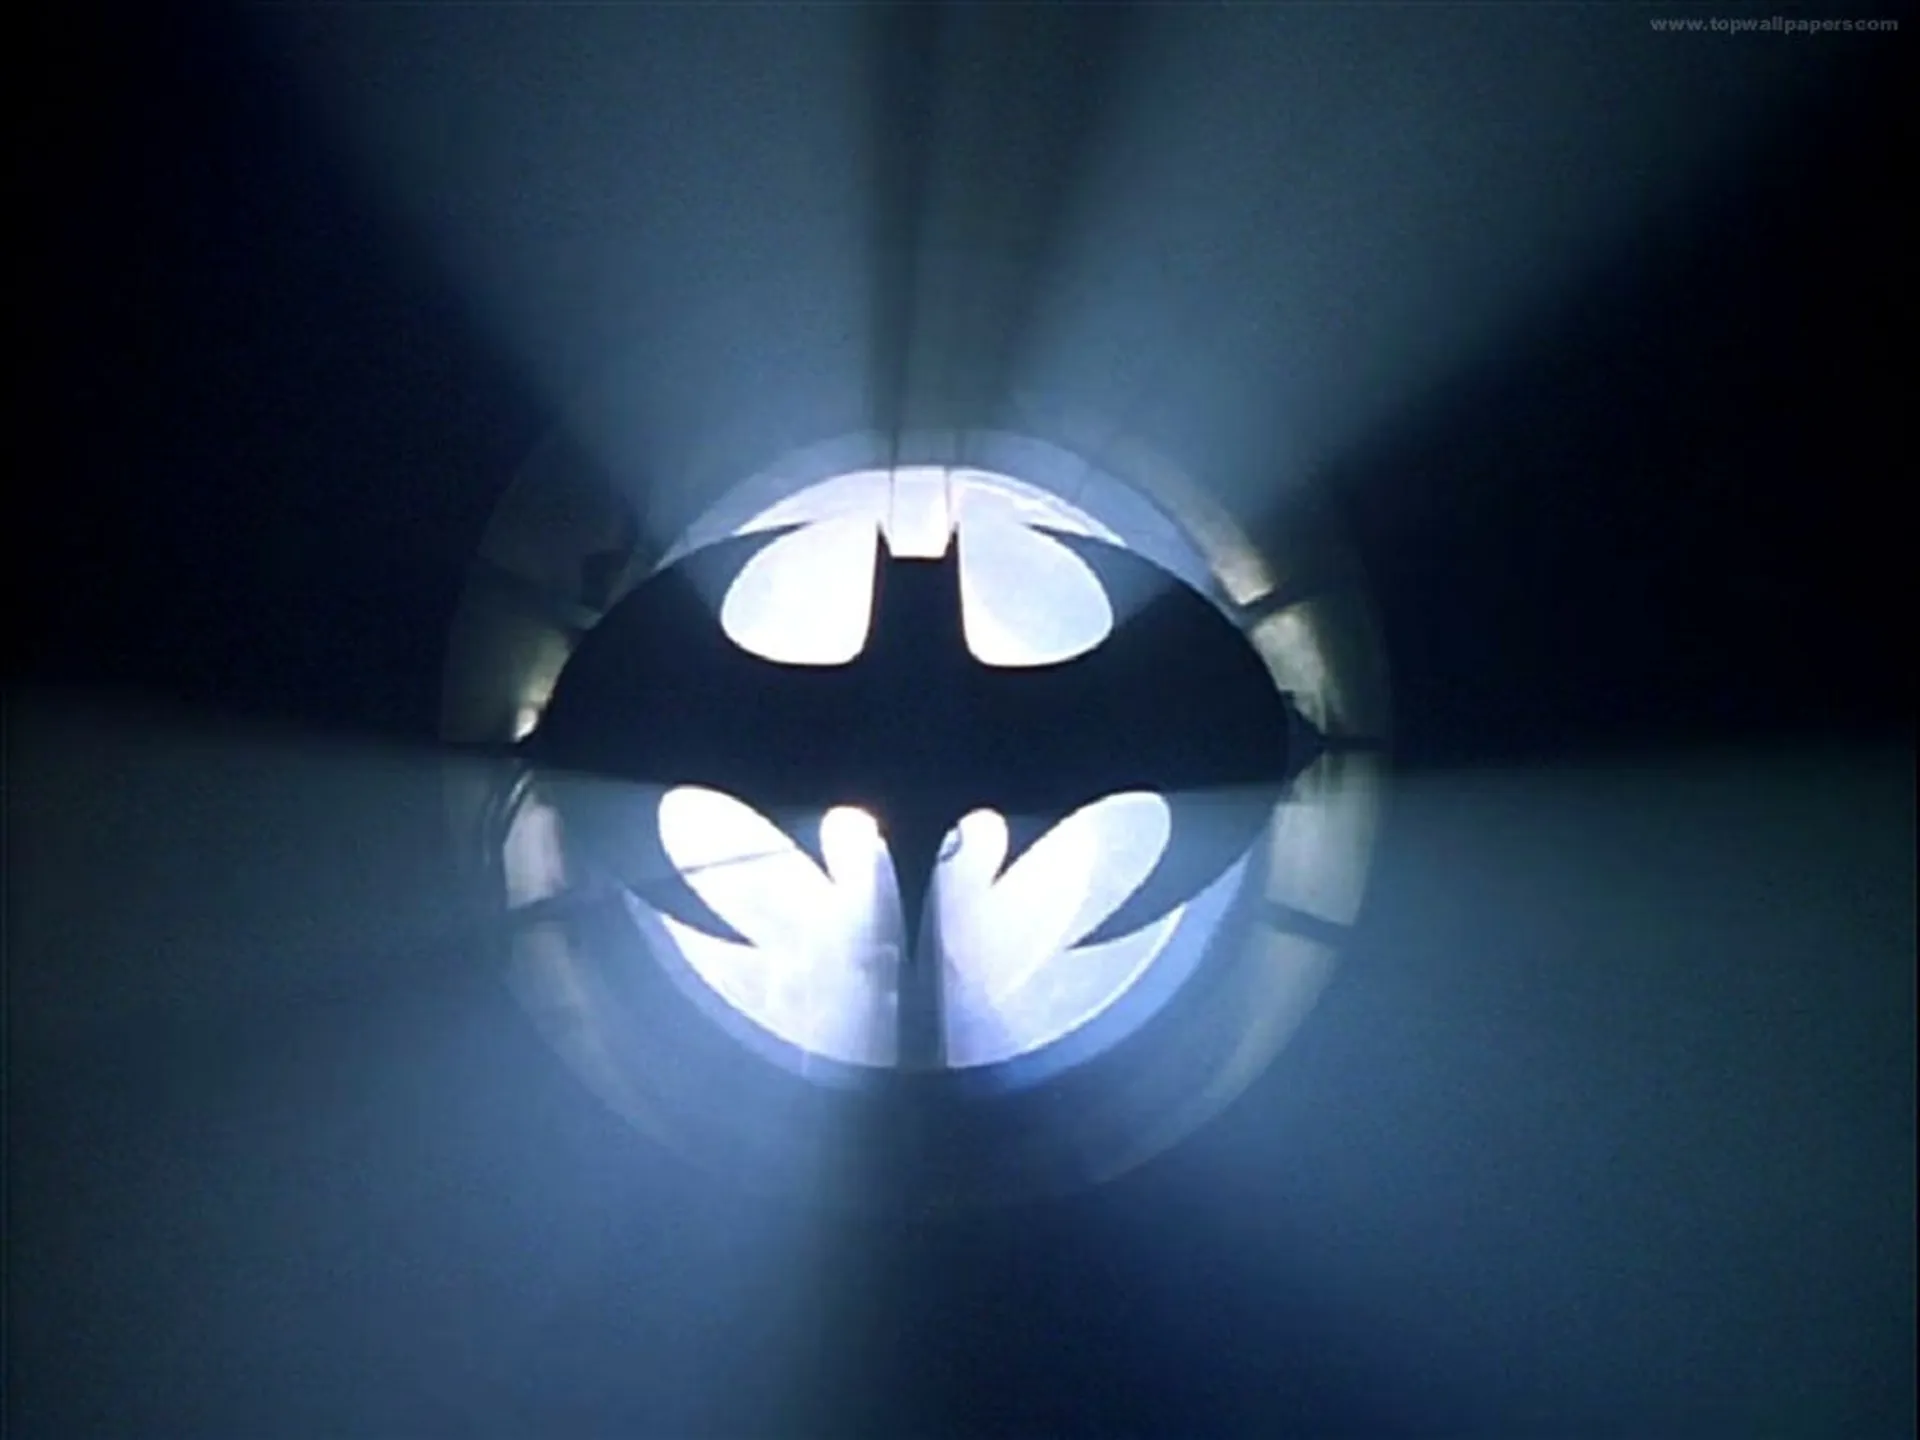 Tonight, the Bat-Signal will be lit to honor 